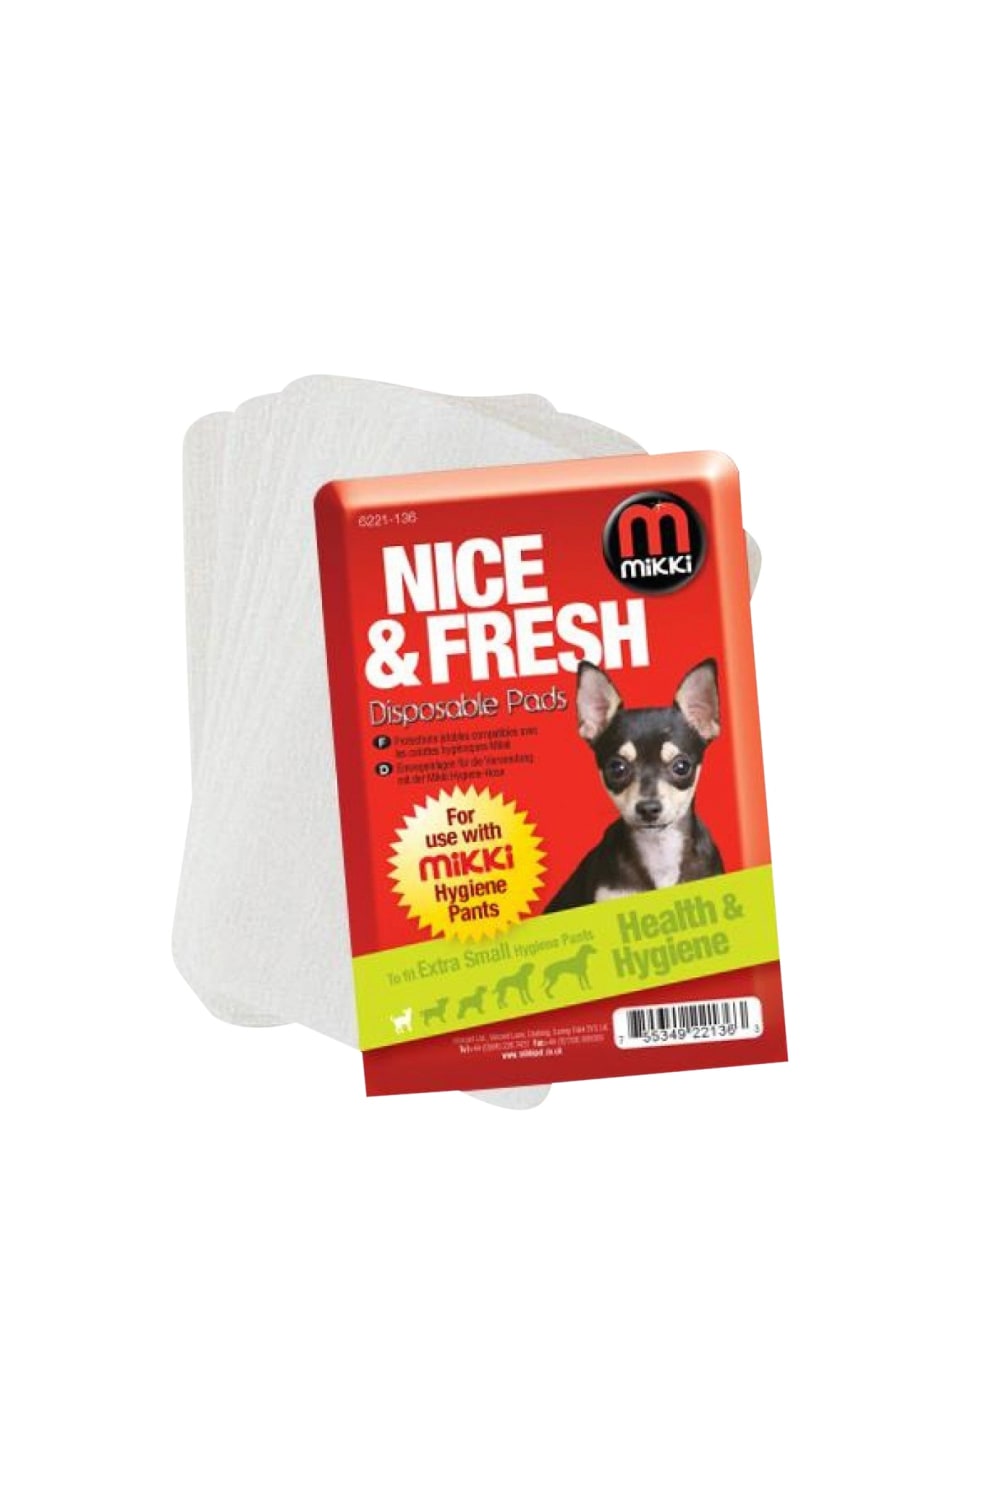 Interpet Mikki Hygiene Pads (May Vary) (Large - Extra Large)